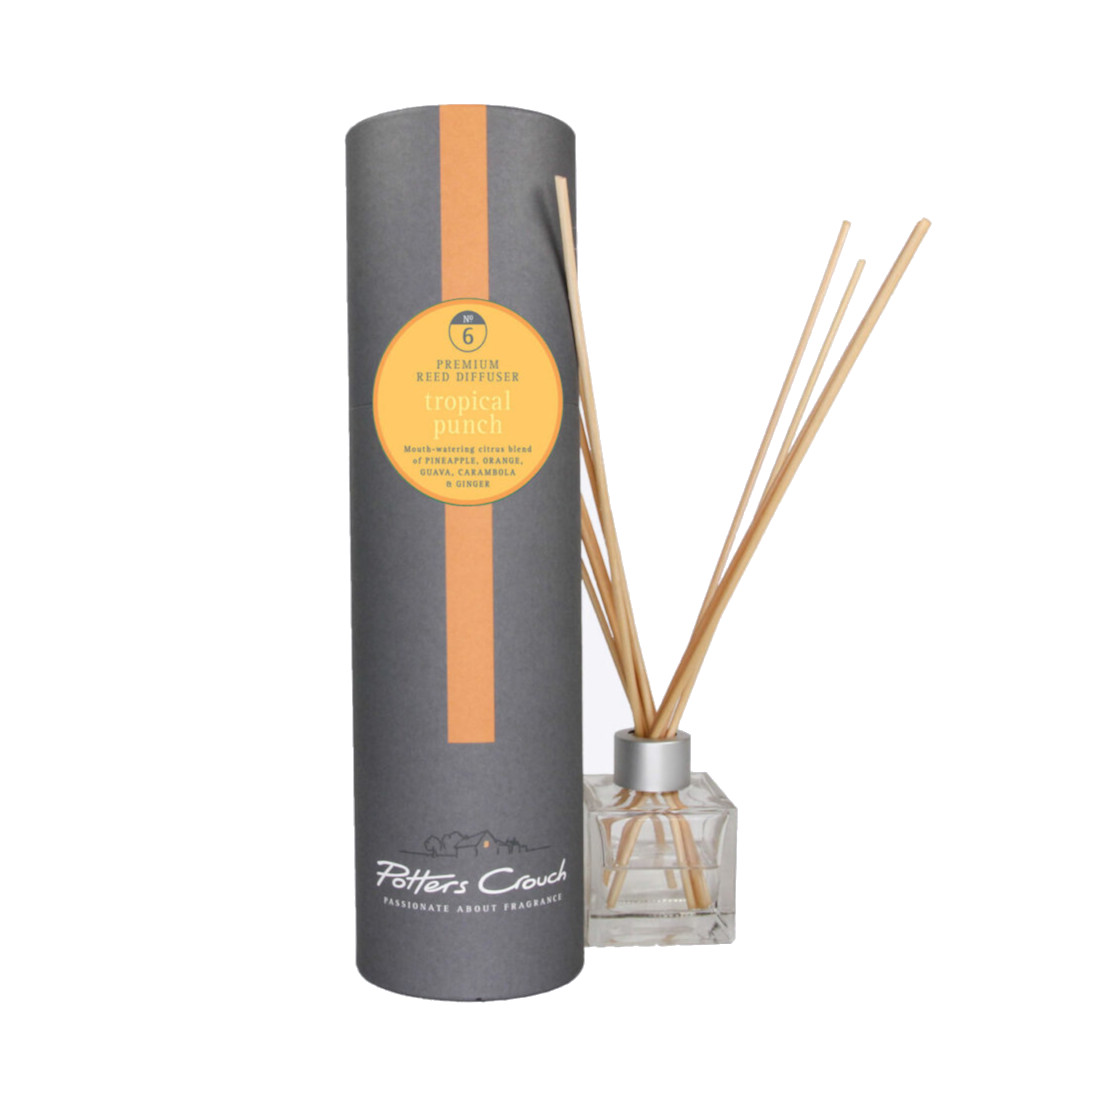 Potters Crouch Tropical Punch Diffuser